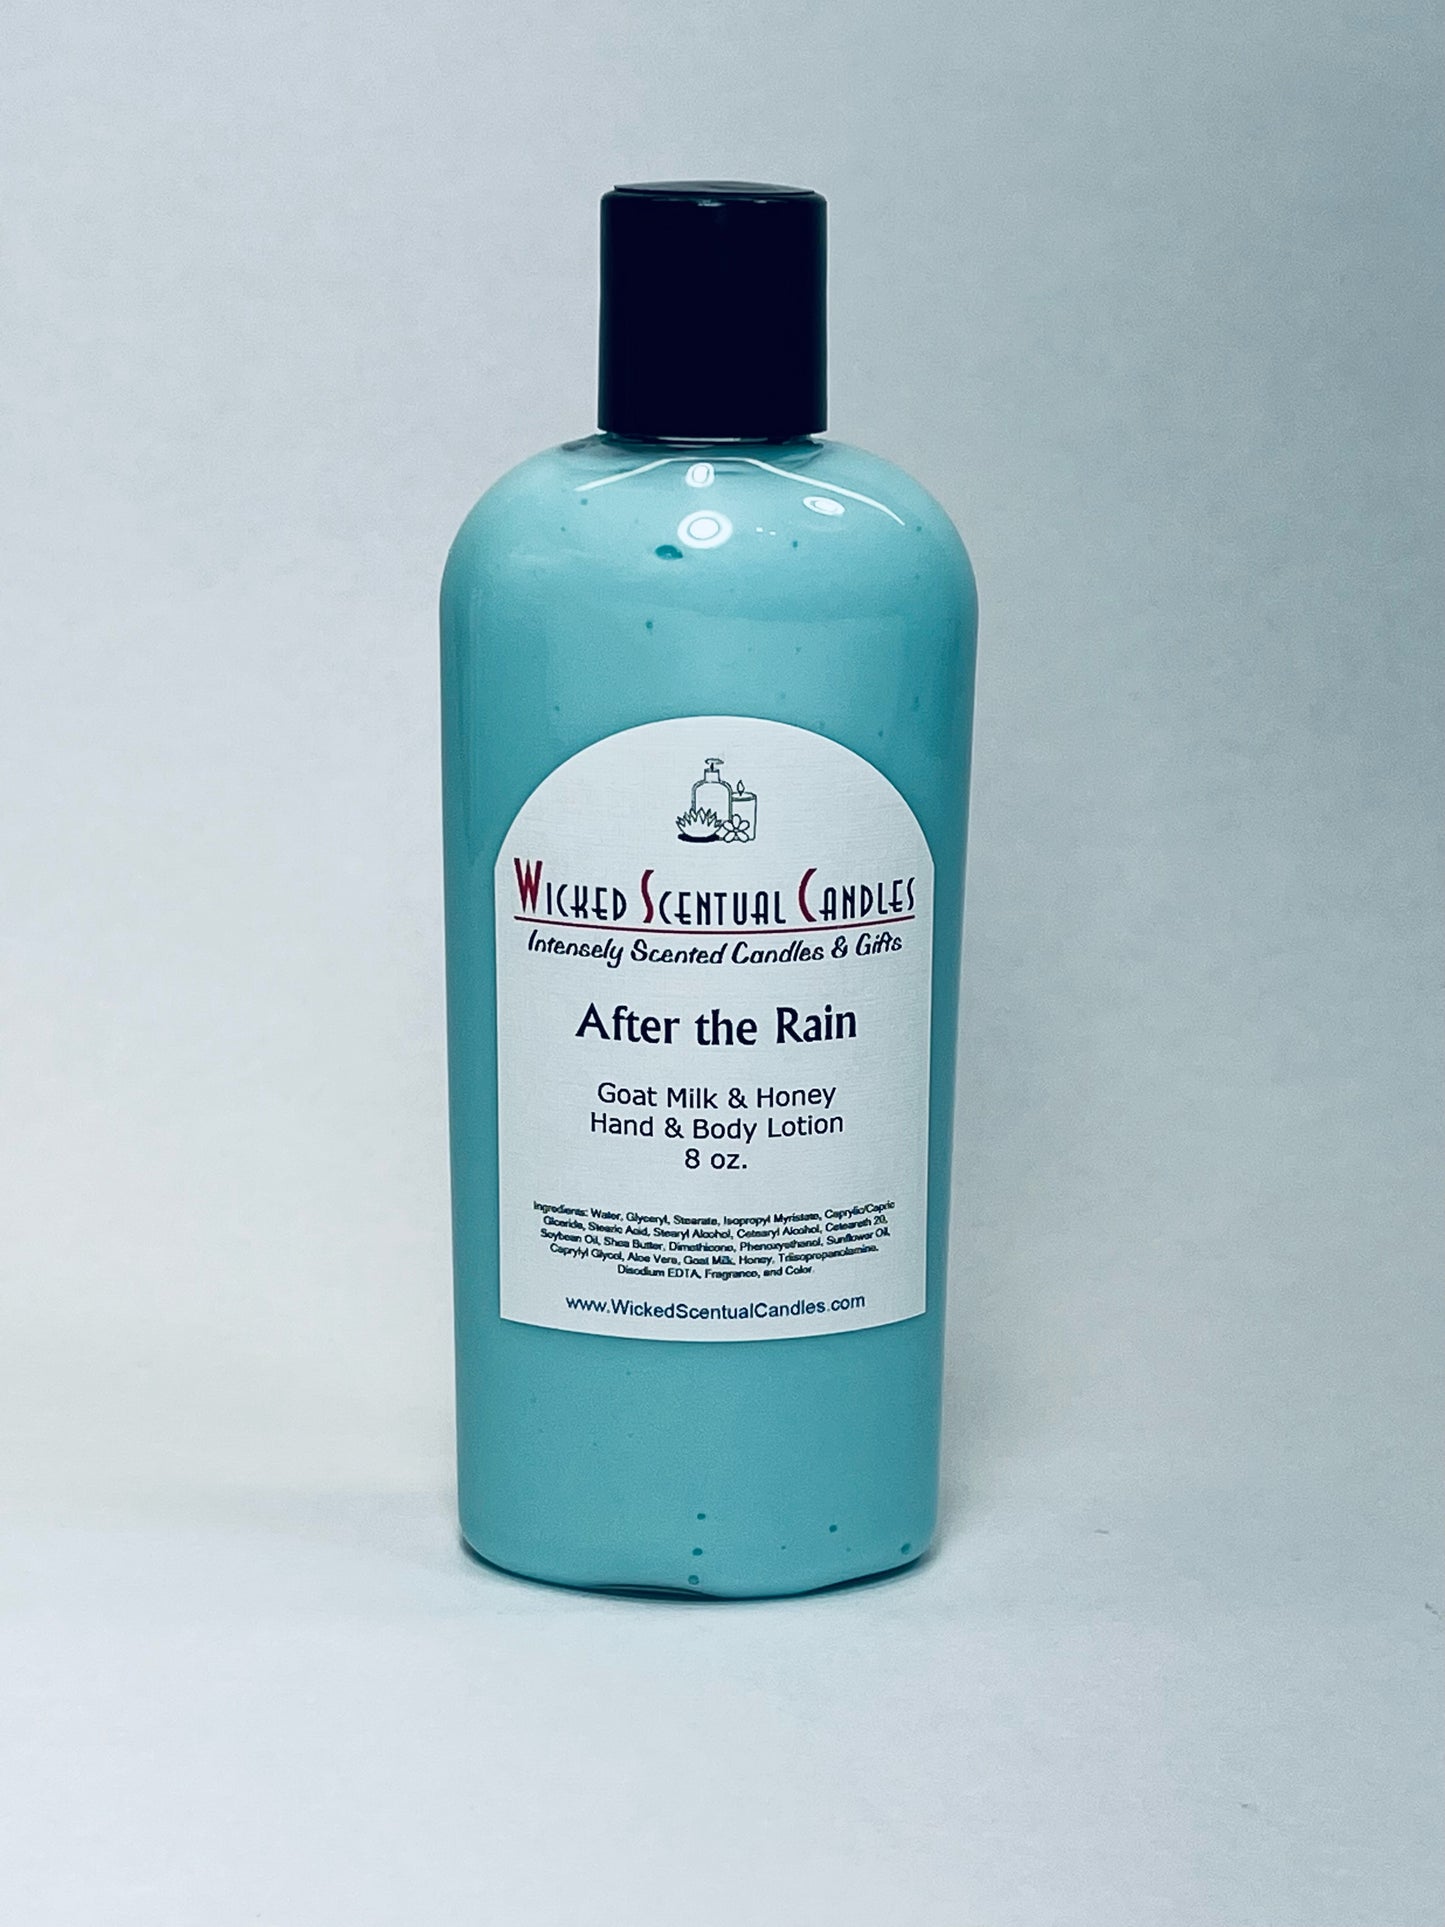 After the Rain Hand & Body Lotion